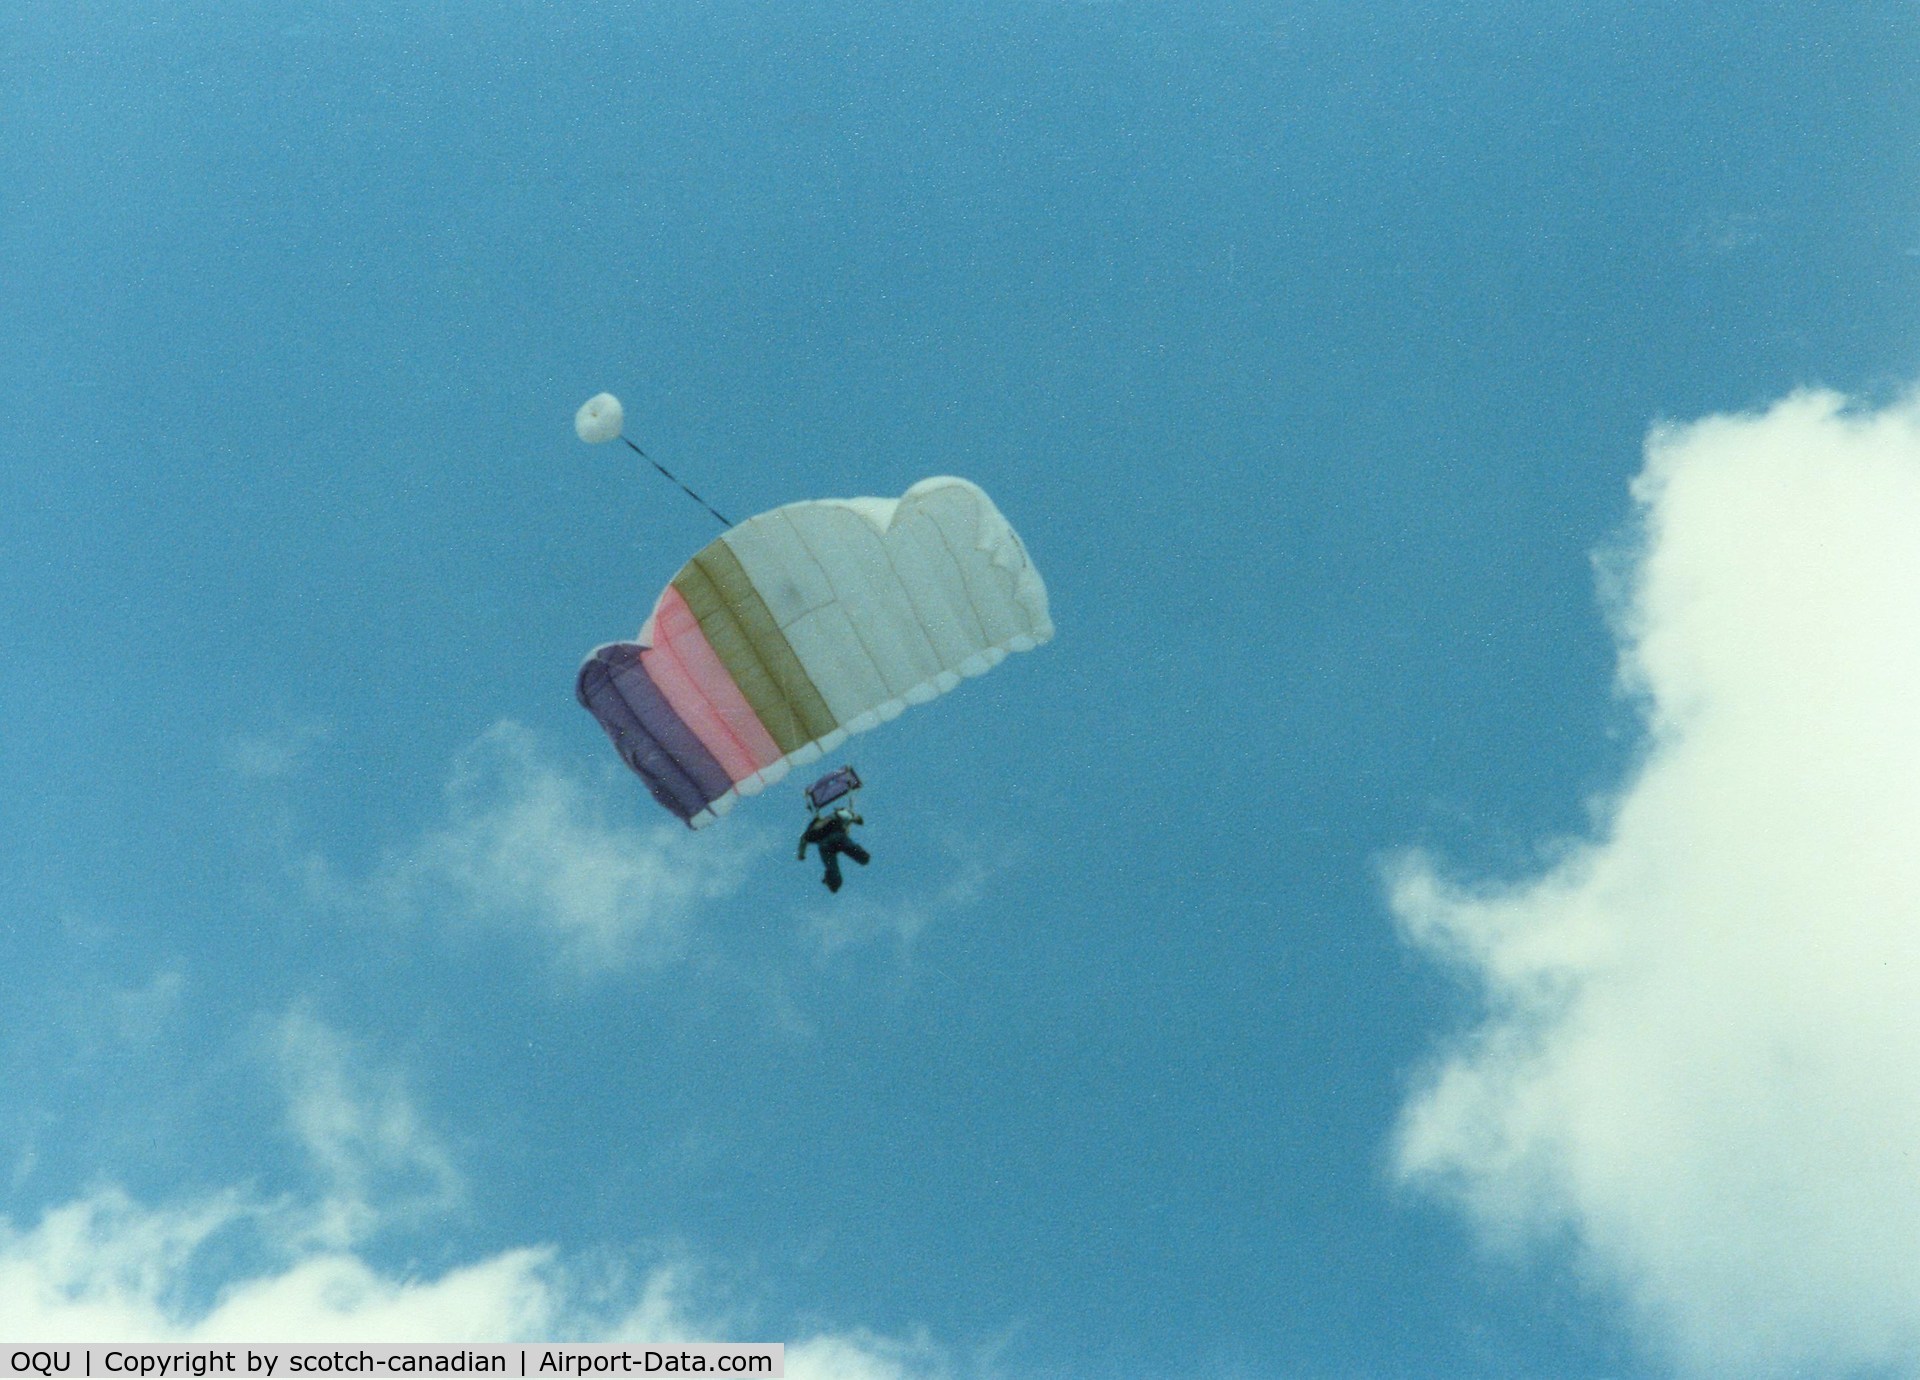 Quonset State Airport (OQU) - Sky Jumper at Quonset State Airport, North Kingstown, RI - circa 1980's